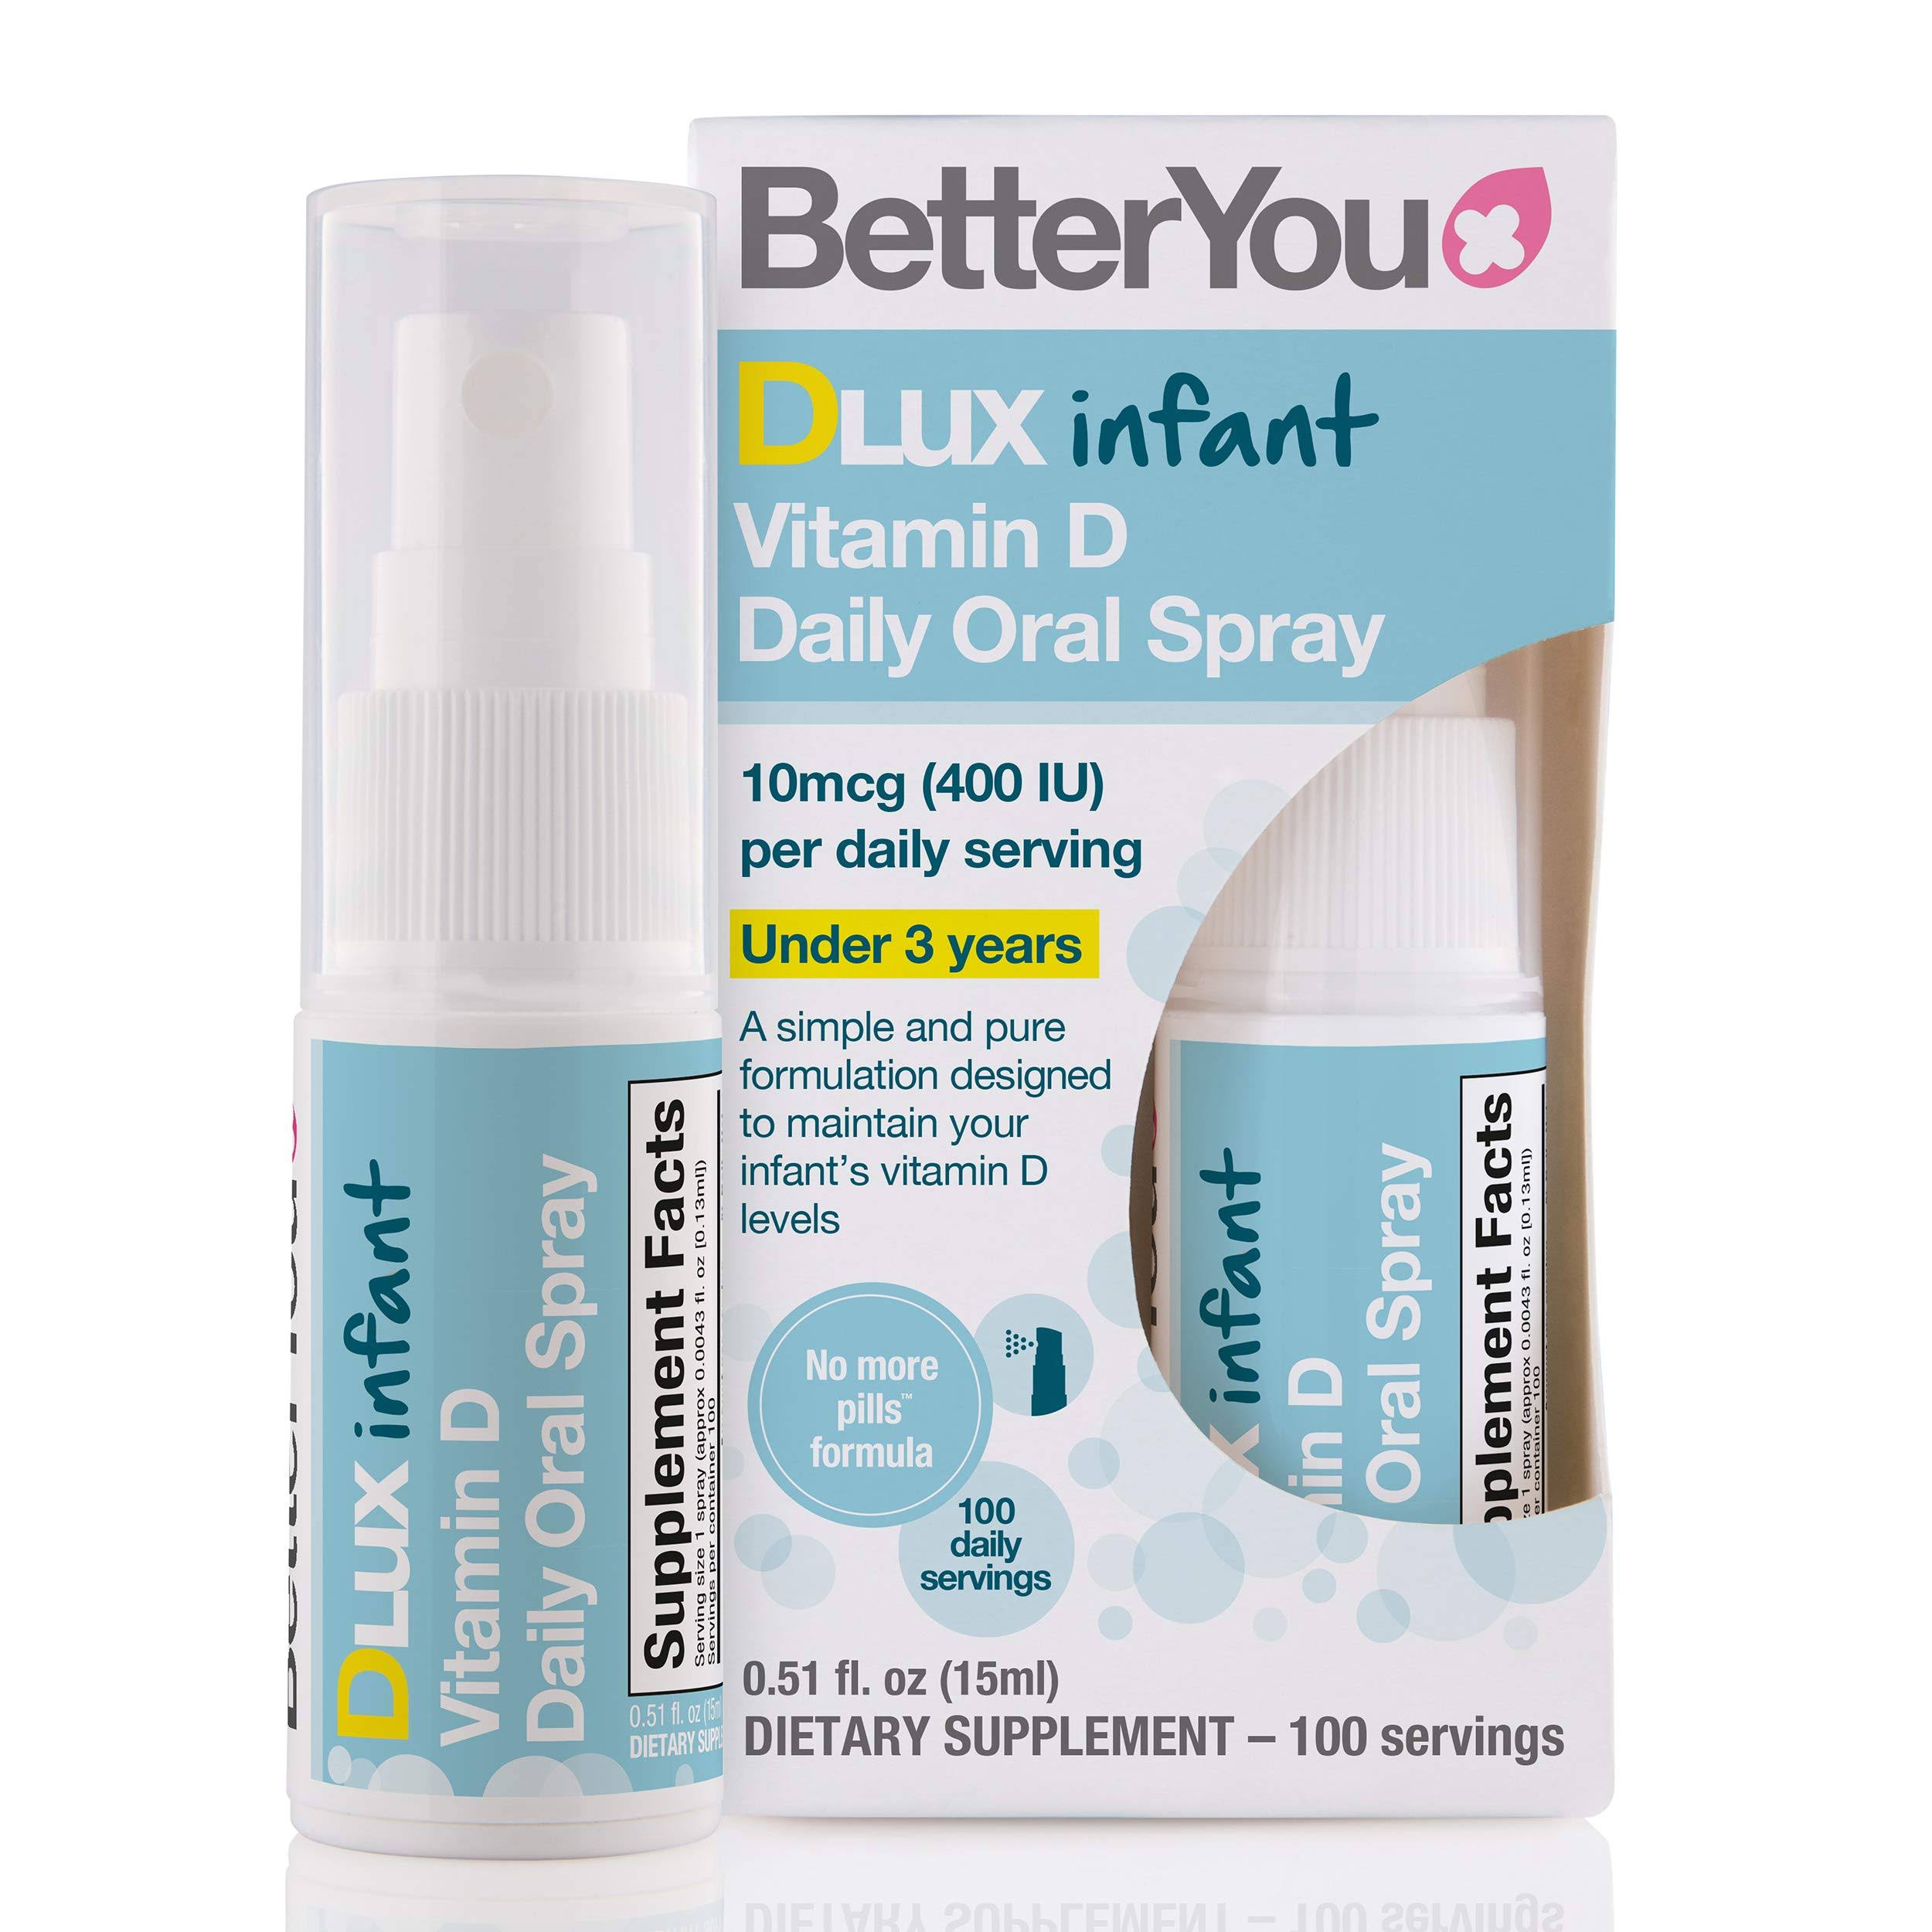 BetterYou DLux Infant Daily Vitamin D Oral Spray - Under 3 Years, 15ml